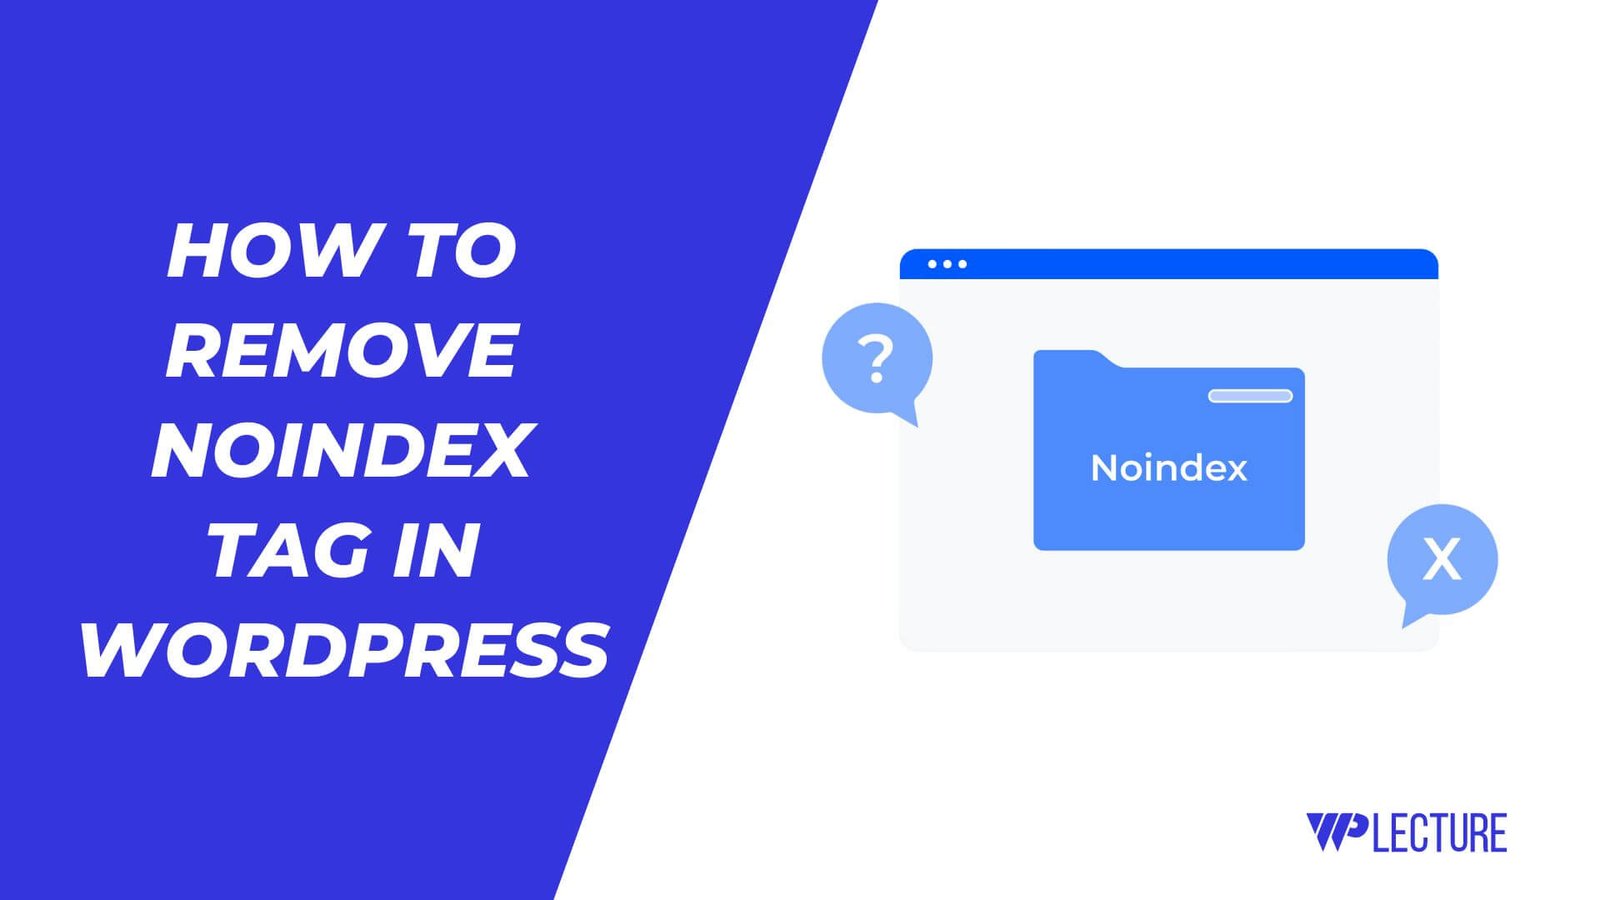 How to Remove Noindex Tag in WordPress